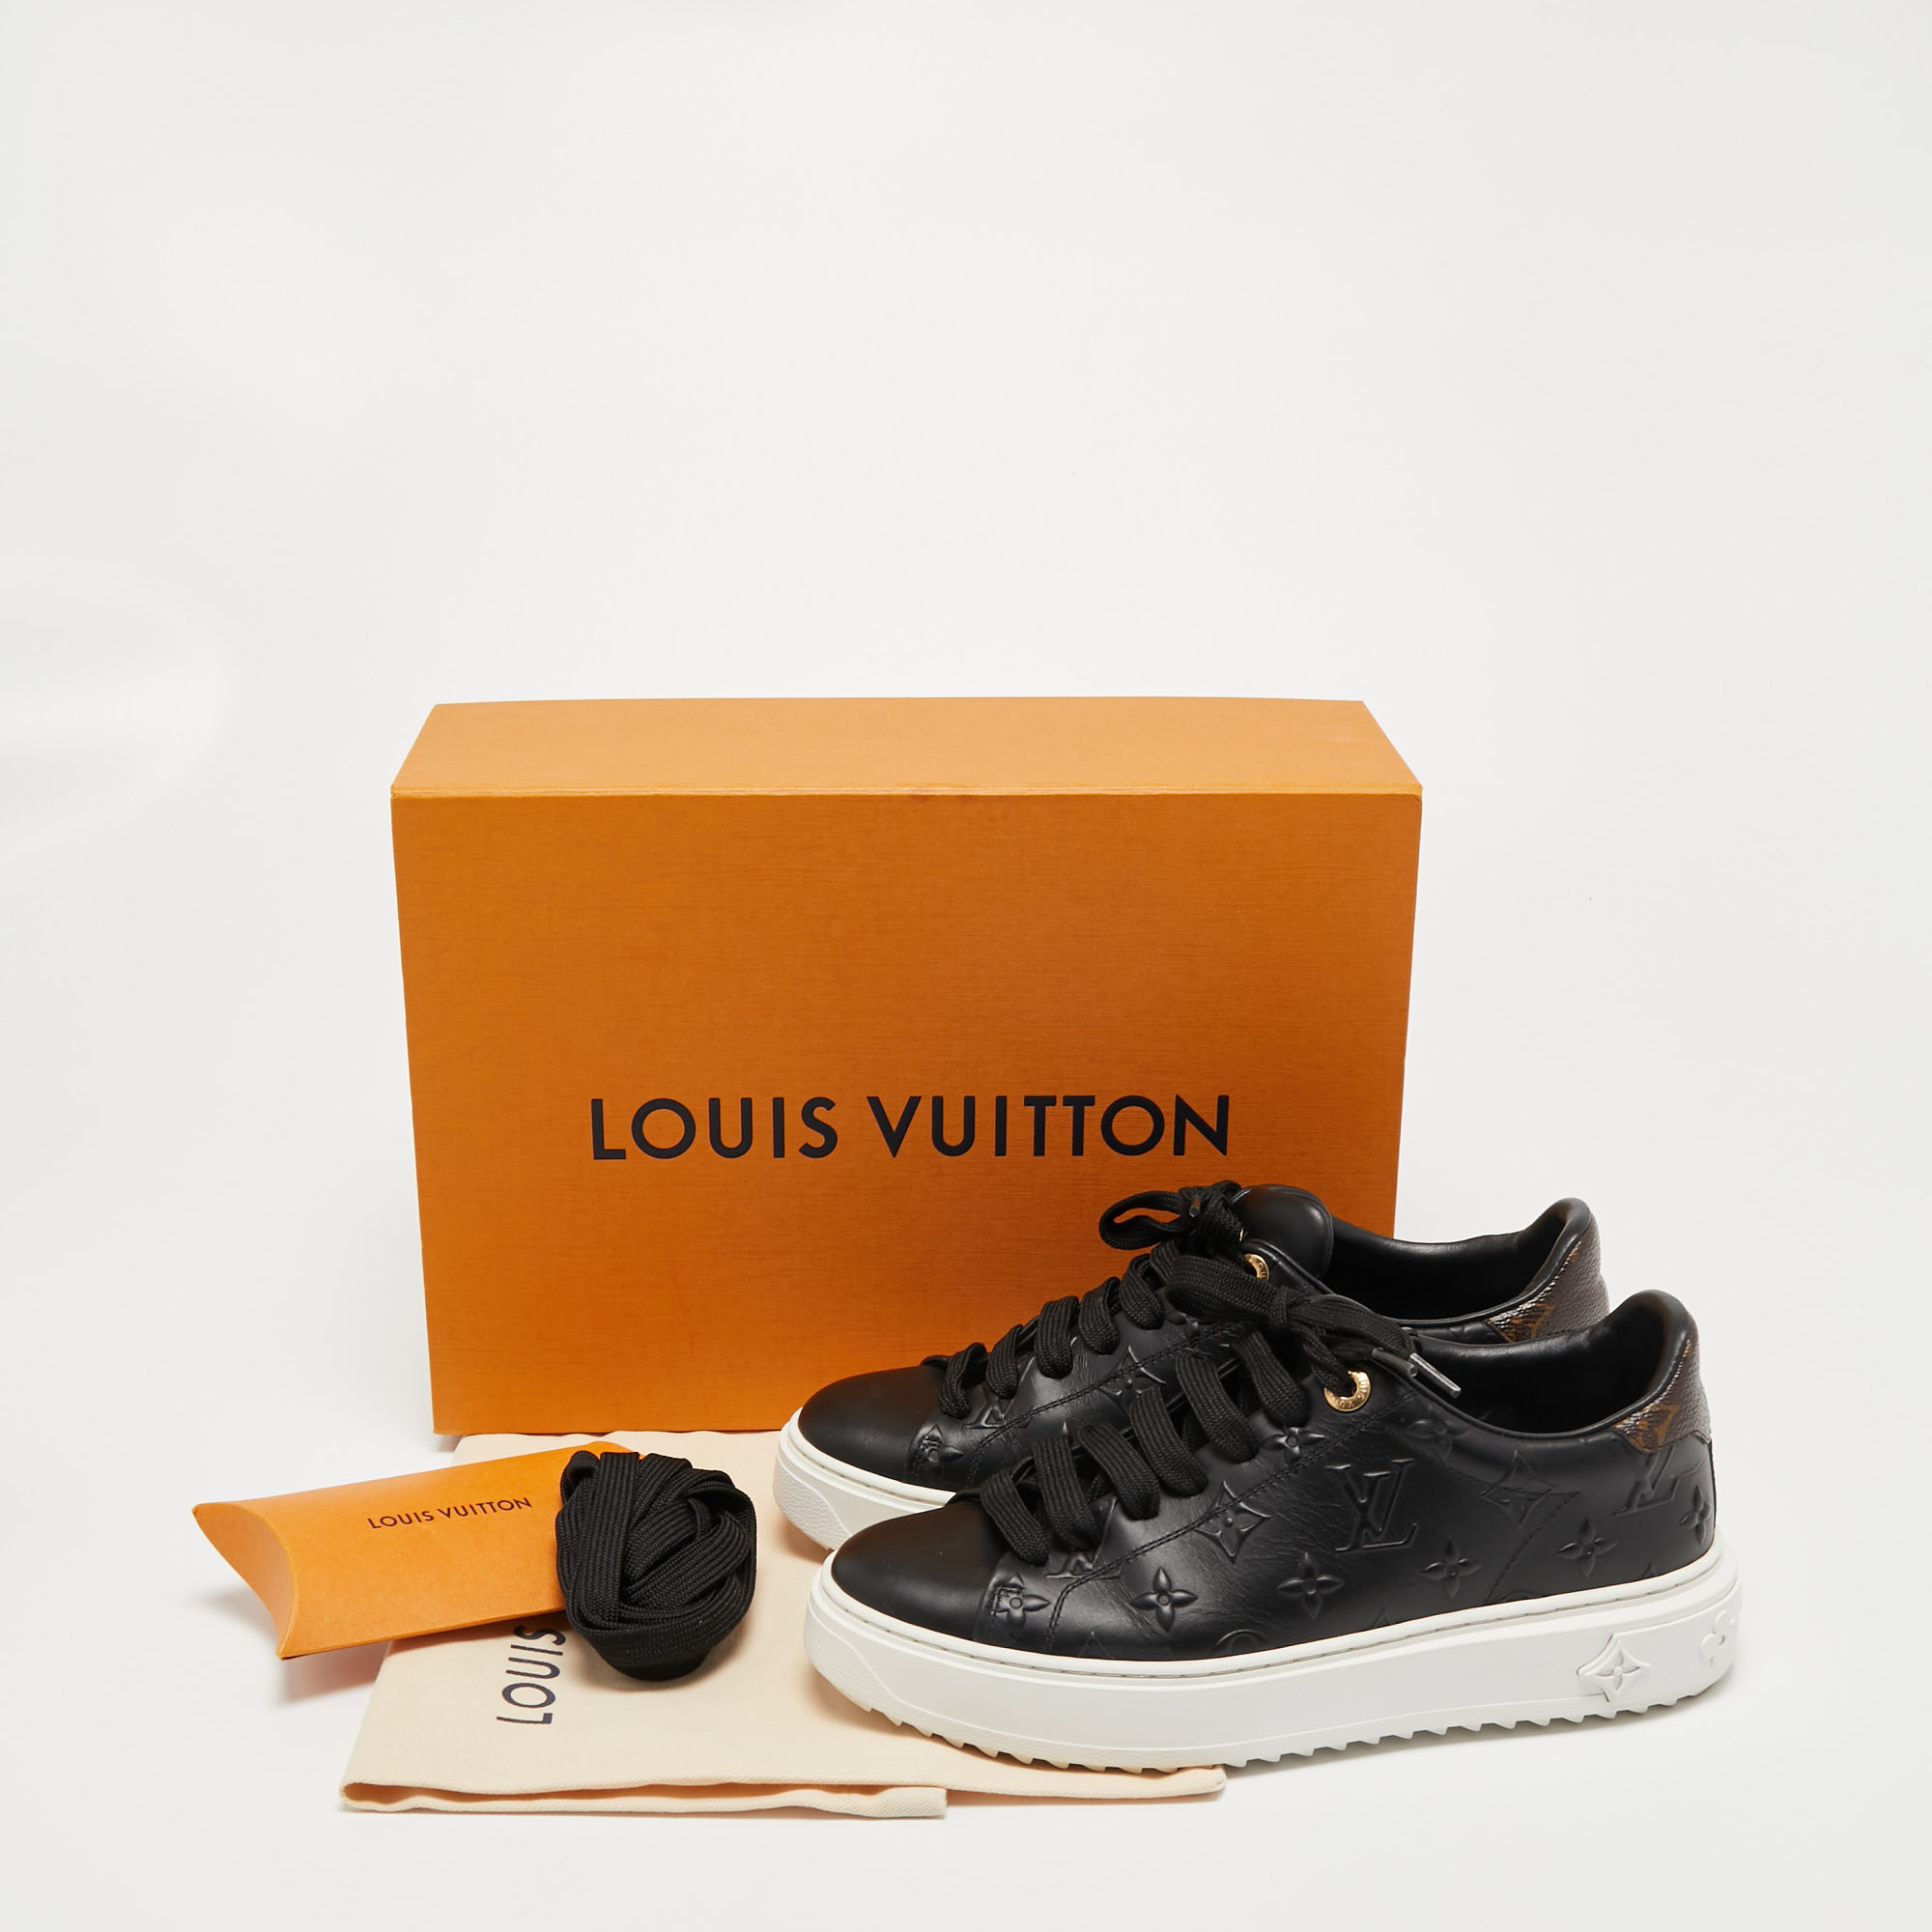 Louis Vuitton Time Out Sneaker Cacao. Size 36.5